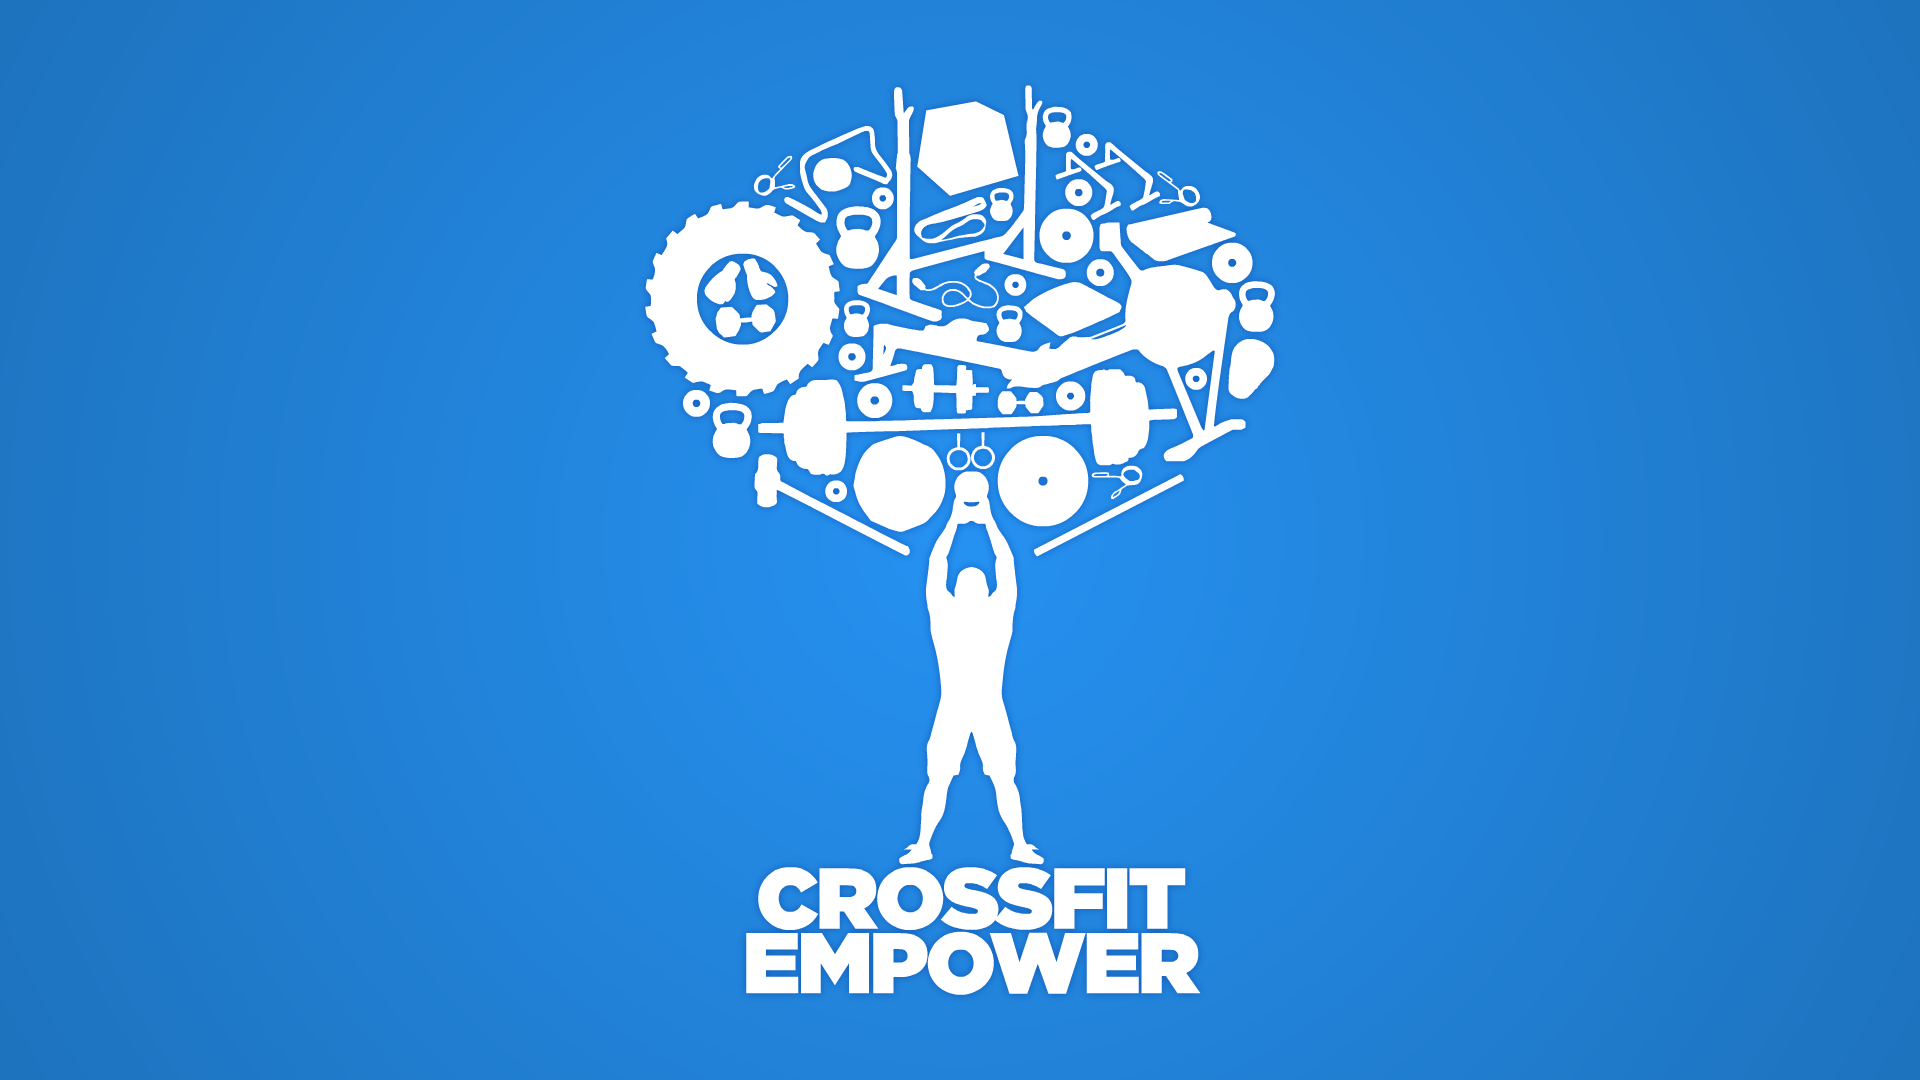 CrossFit Empower Poster